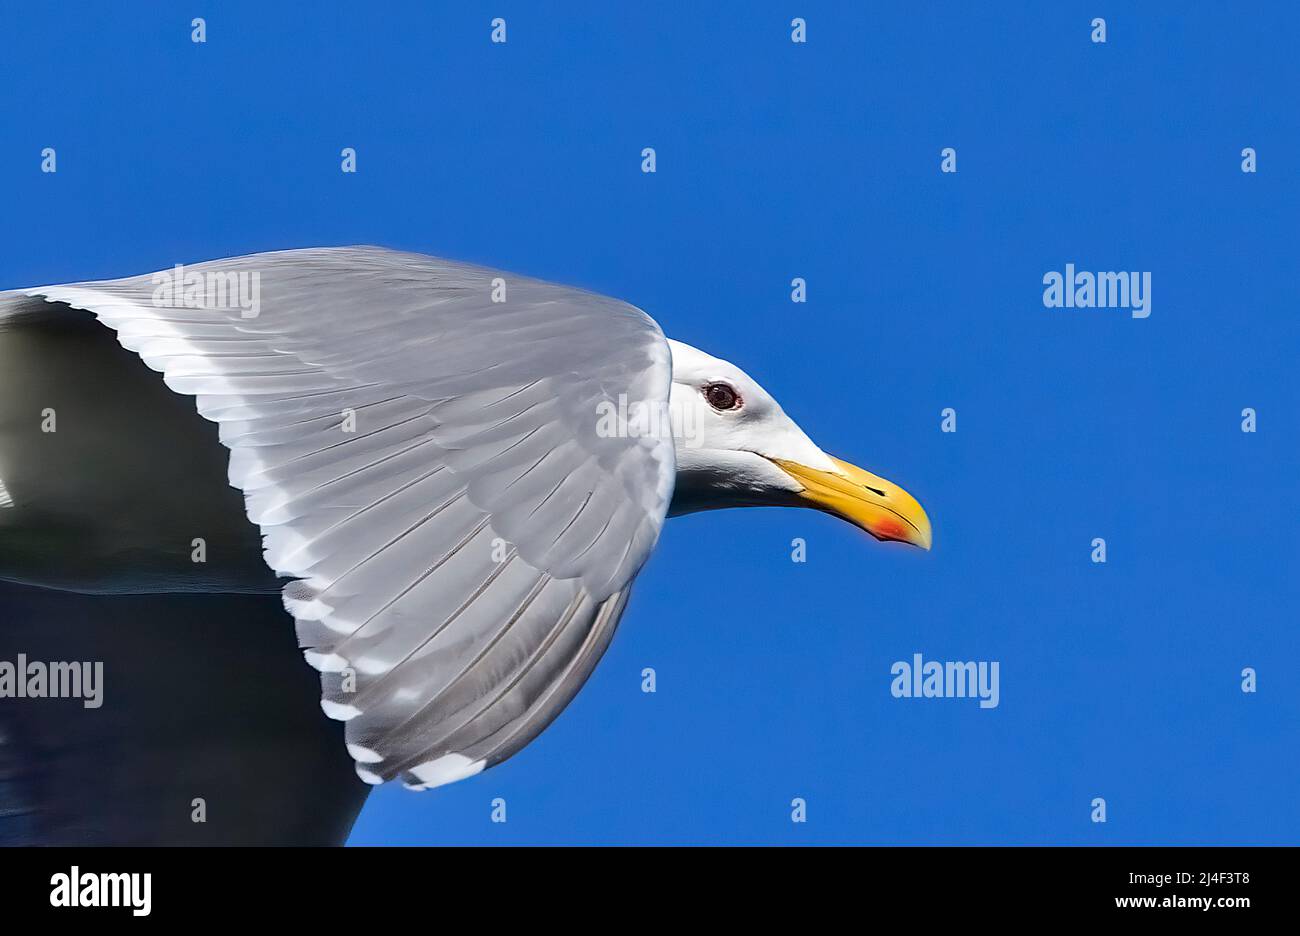 A close up image of a Glaucous-winged gull 'Larus glaucescens', flying against a blue sky Stock Photo